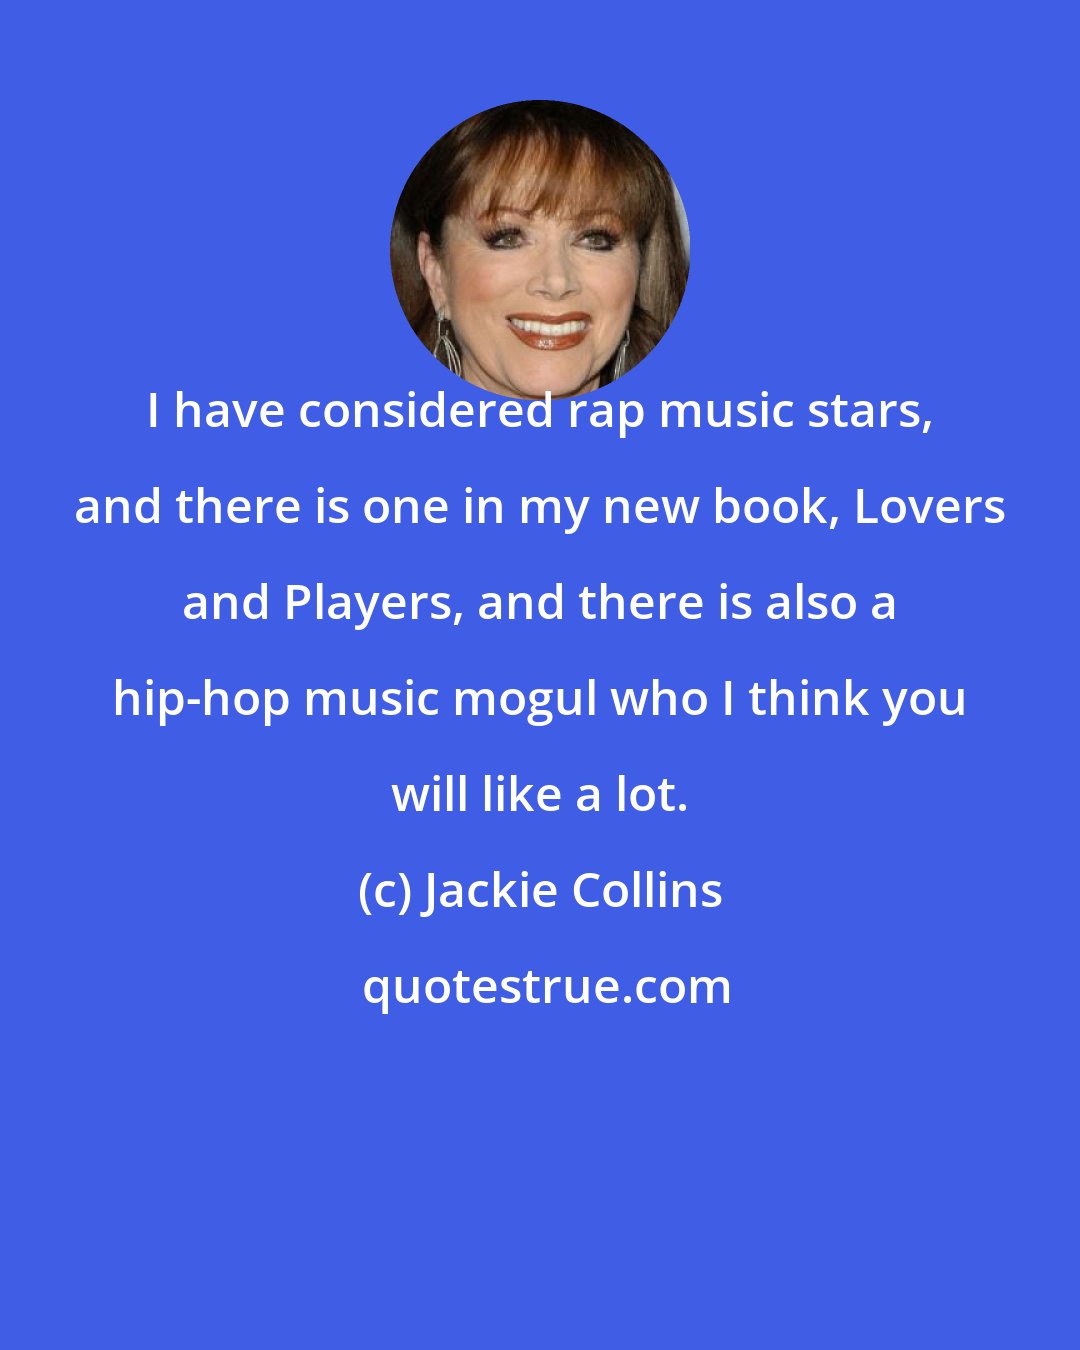 Jackie Collins: I have considered rap music stars, and there is one in my new book, Lovers and Players, and there is also a hip-hop music mogul who I think you will like a lot.